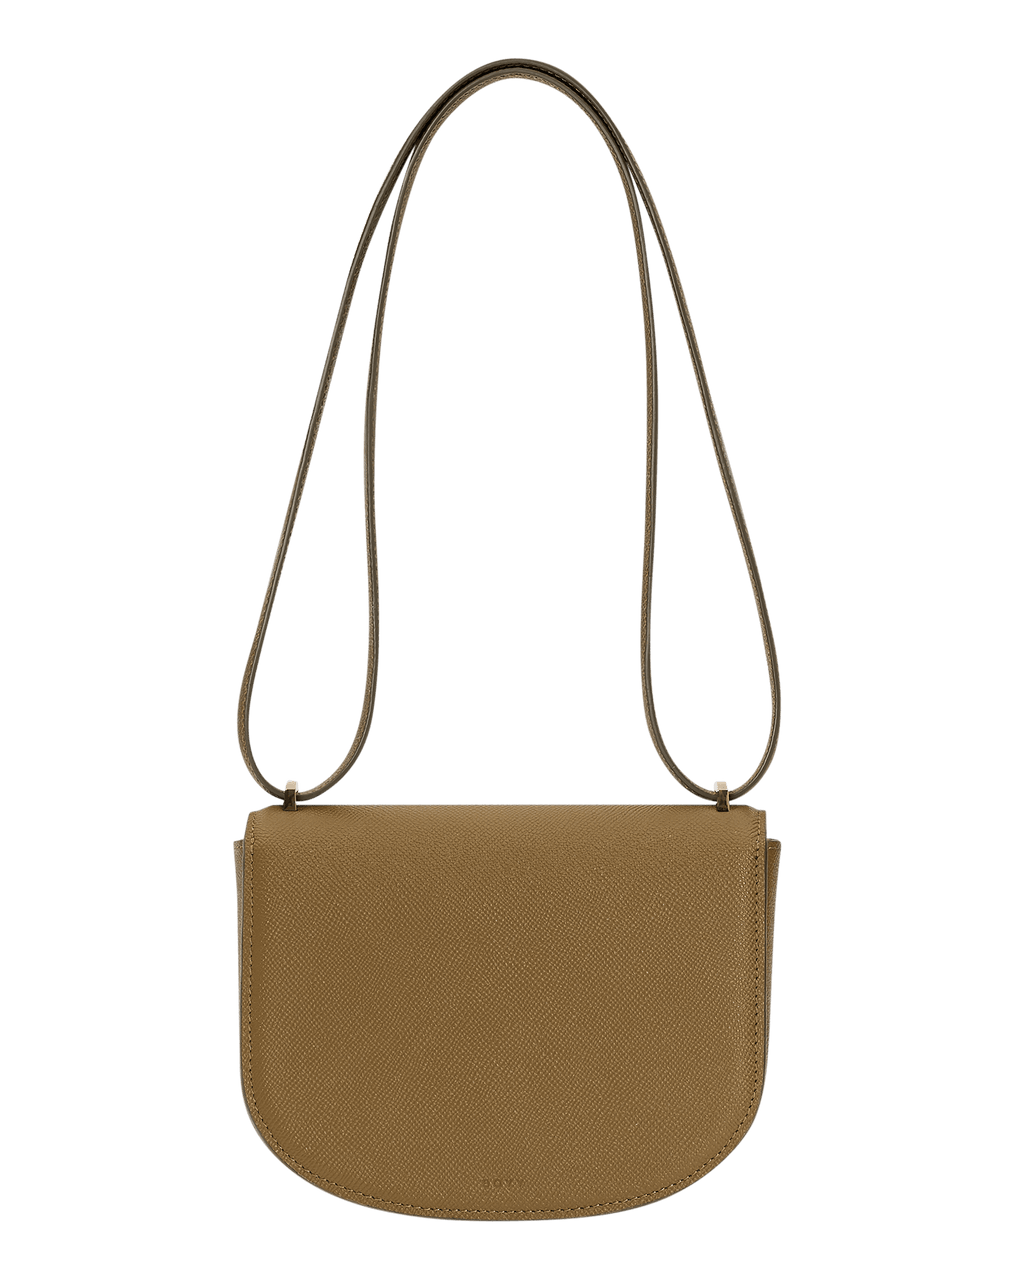 Small, brown grained leather handbag, a large gold buckle on the front flap closure, and a shoulder strap